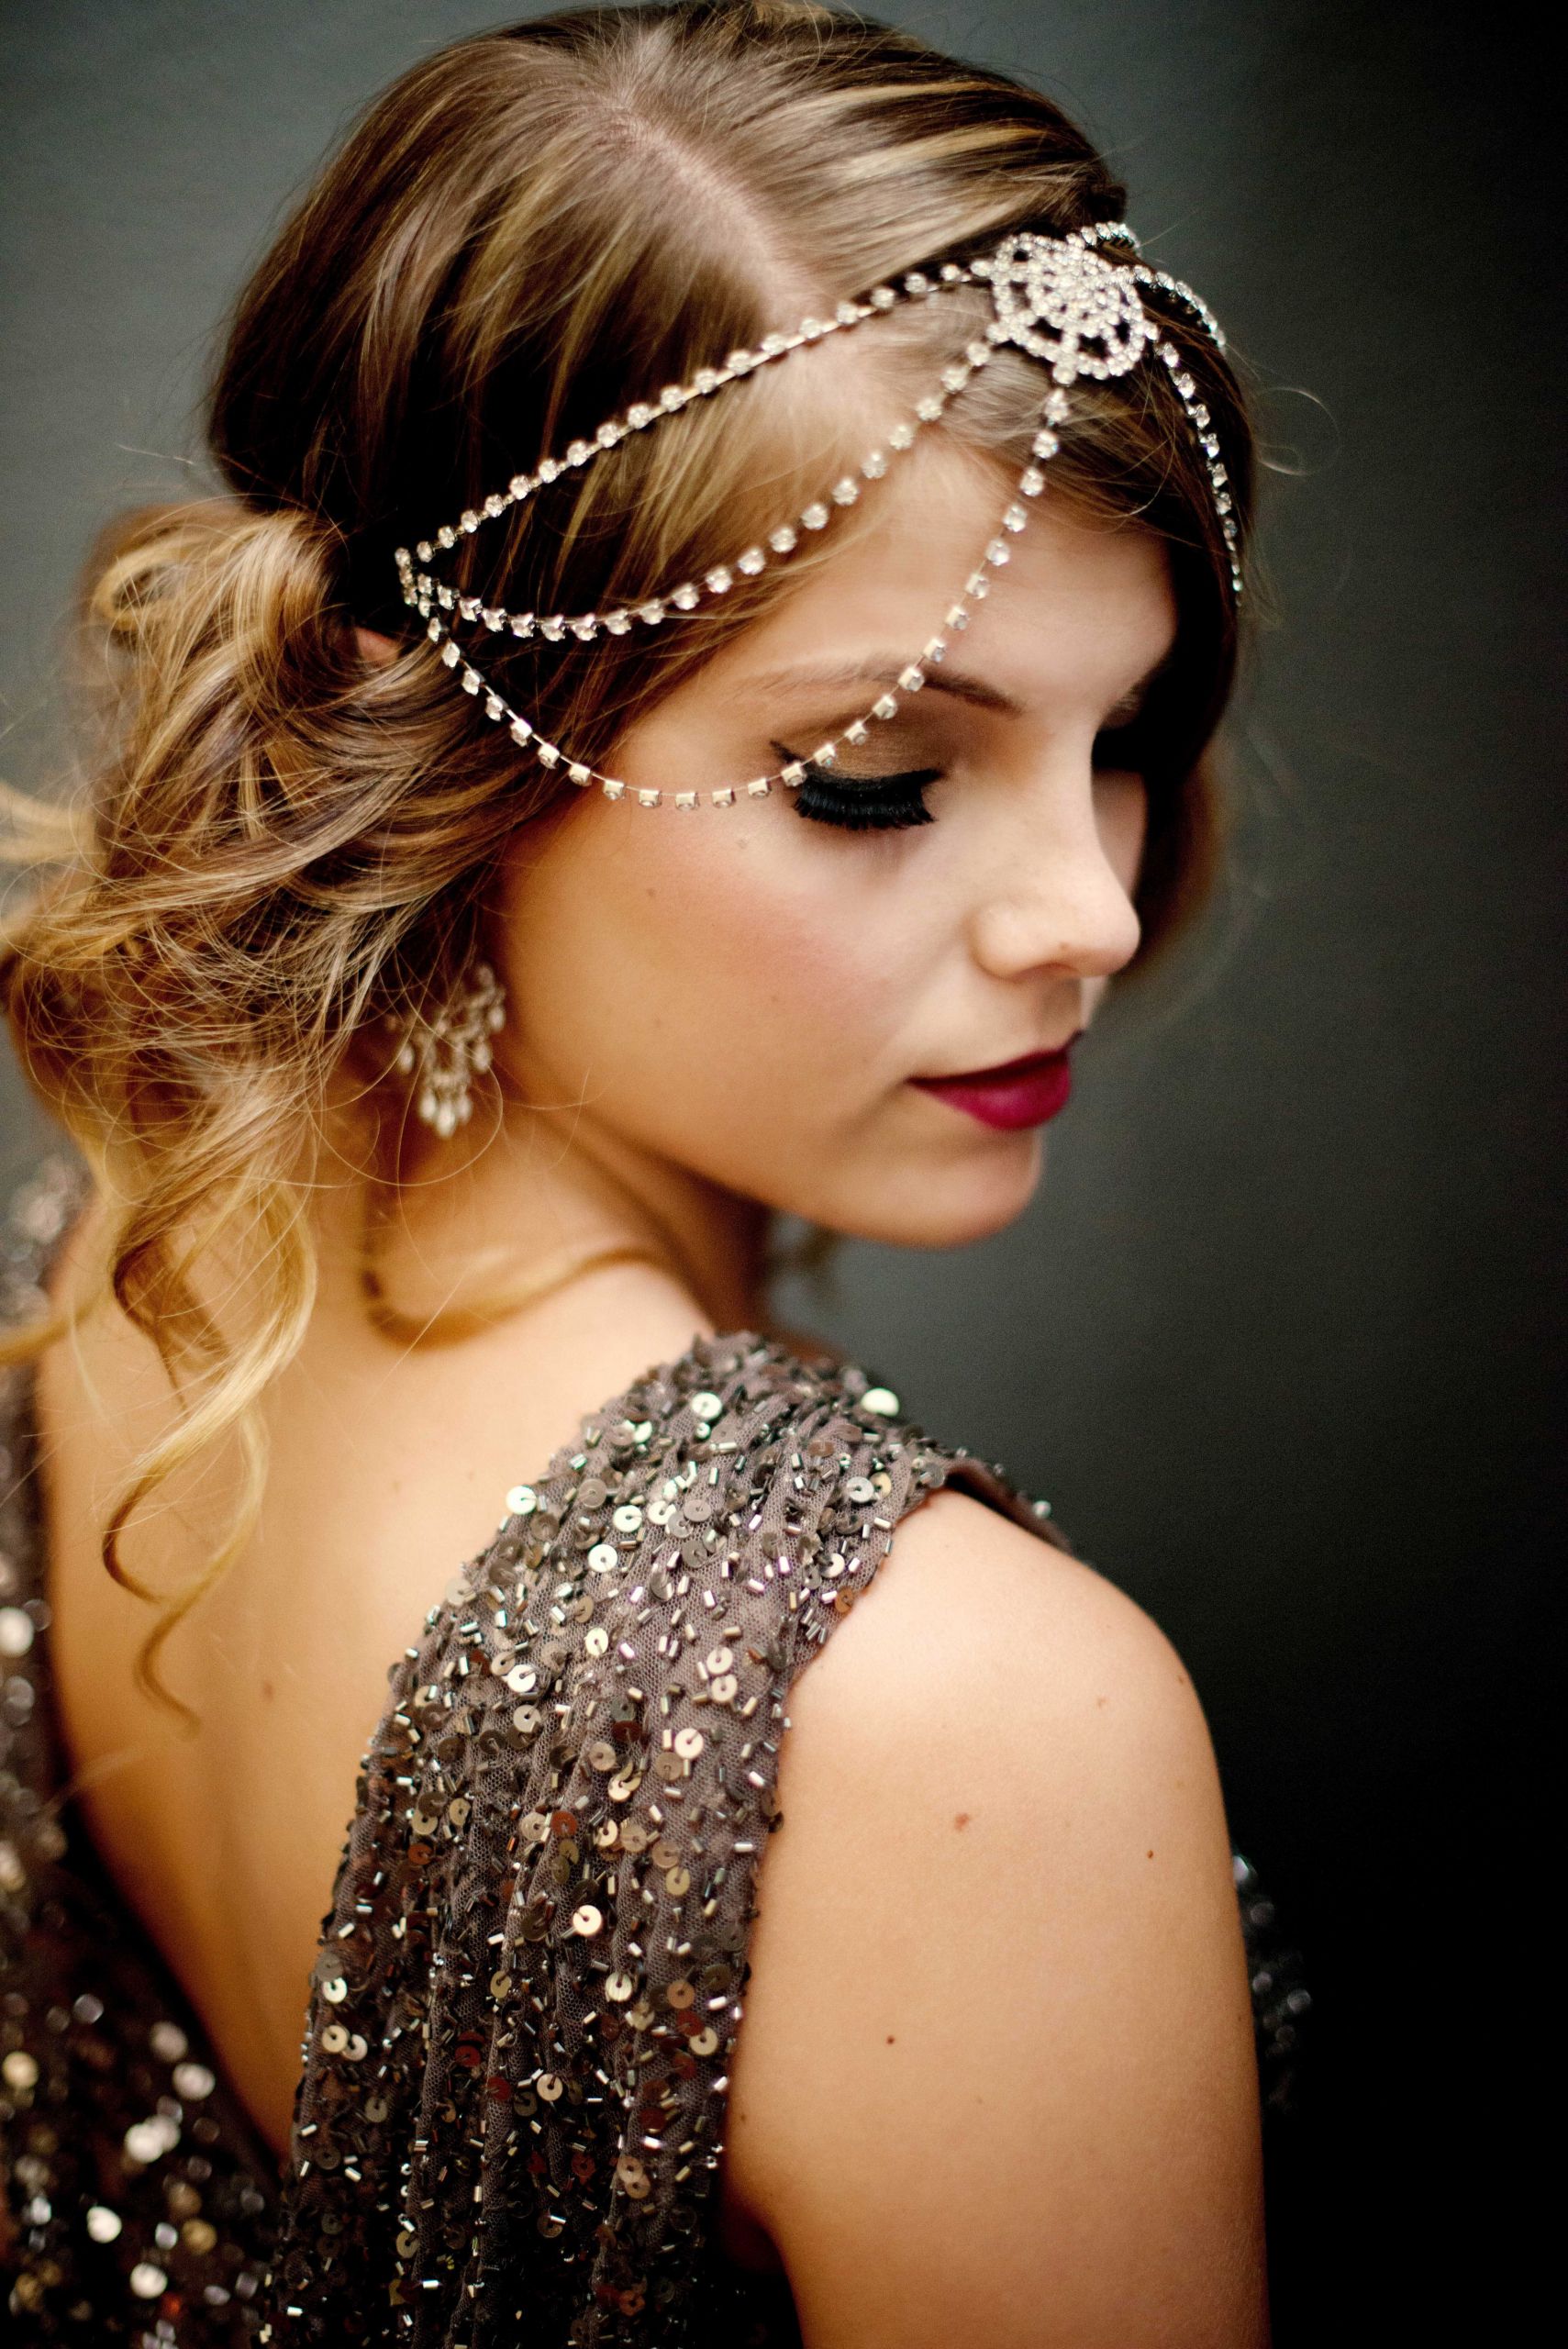 Great Gatsby Hairstyles For Long Hair
 Pretty Hairstyles for Long Hair 1920s